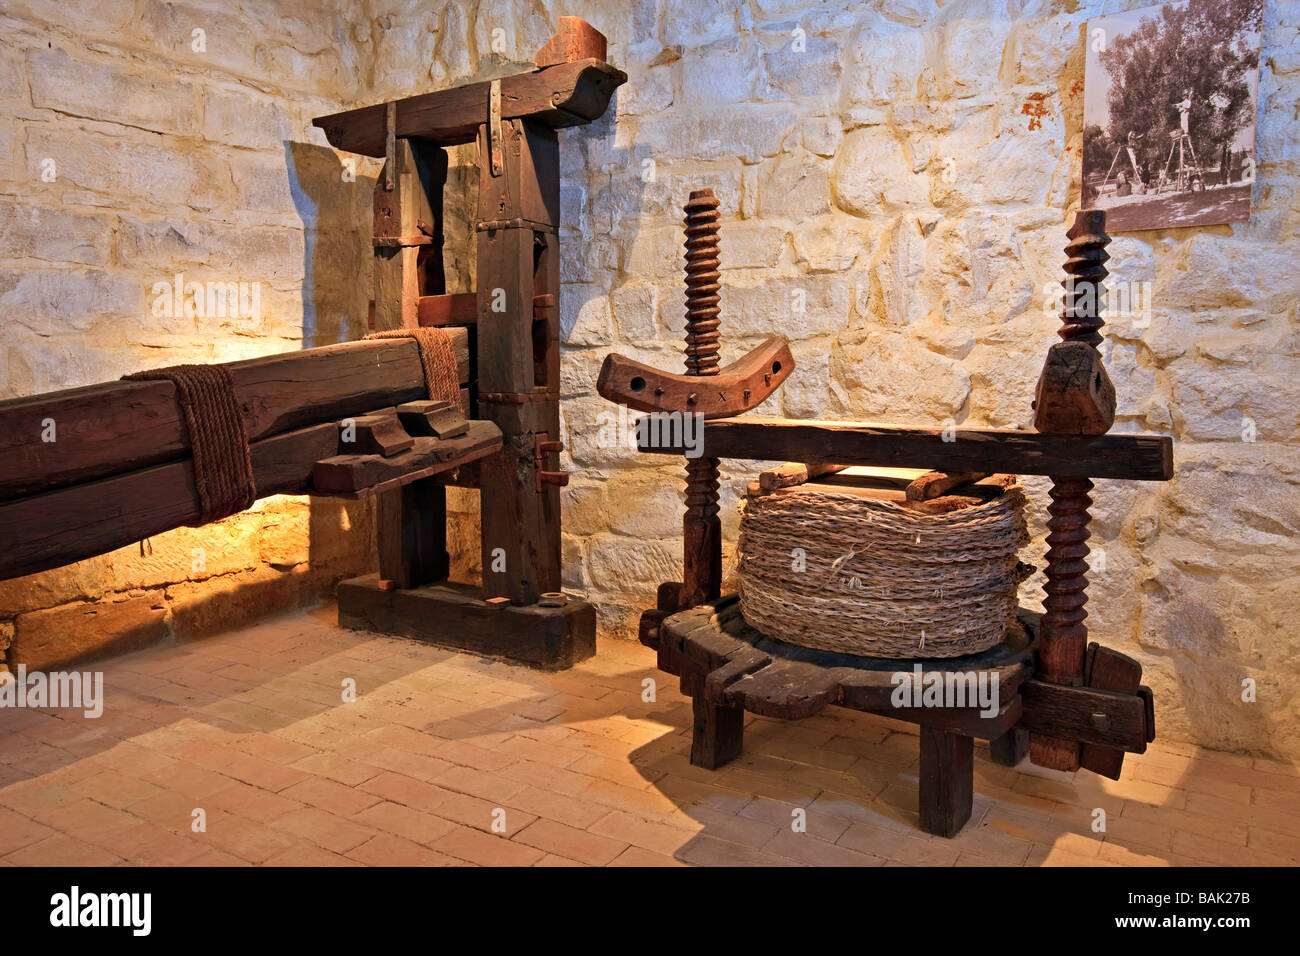 Olive press on display at the Museo de la Cultura de Oliva,(Culture Museum of the Olive) near the town of Baeza,Province of Jaen Stock Photo